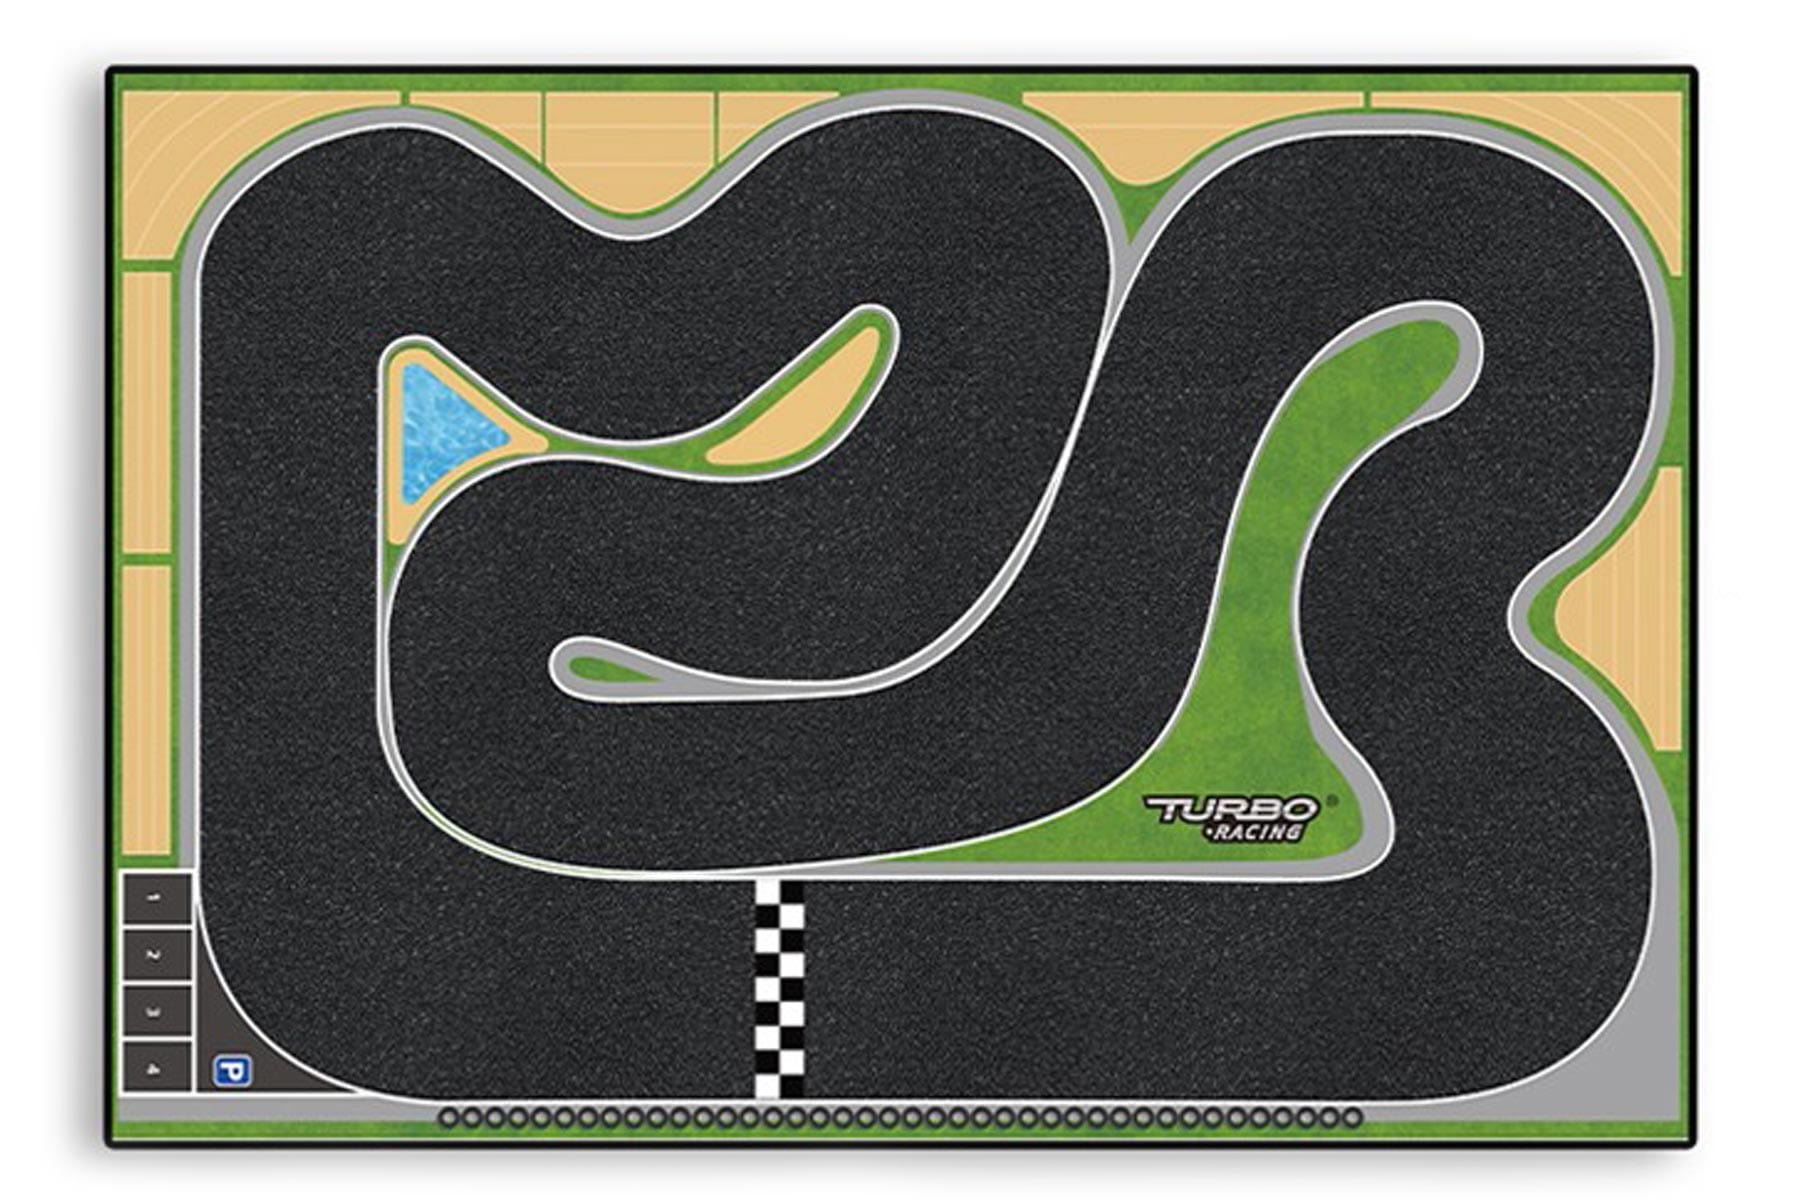 Turbo Racing Rollup Racetrack 80 x 120cm (31.2 x 46.8) [TBR760050] Motion  RC Europe